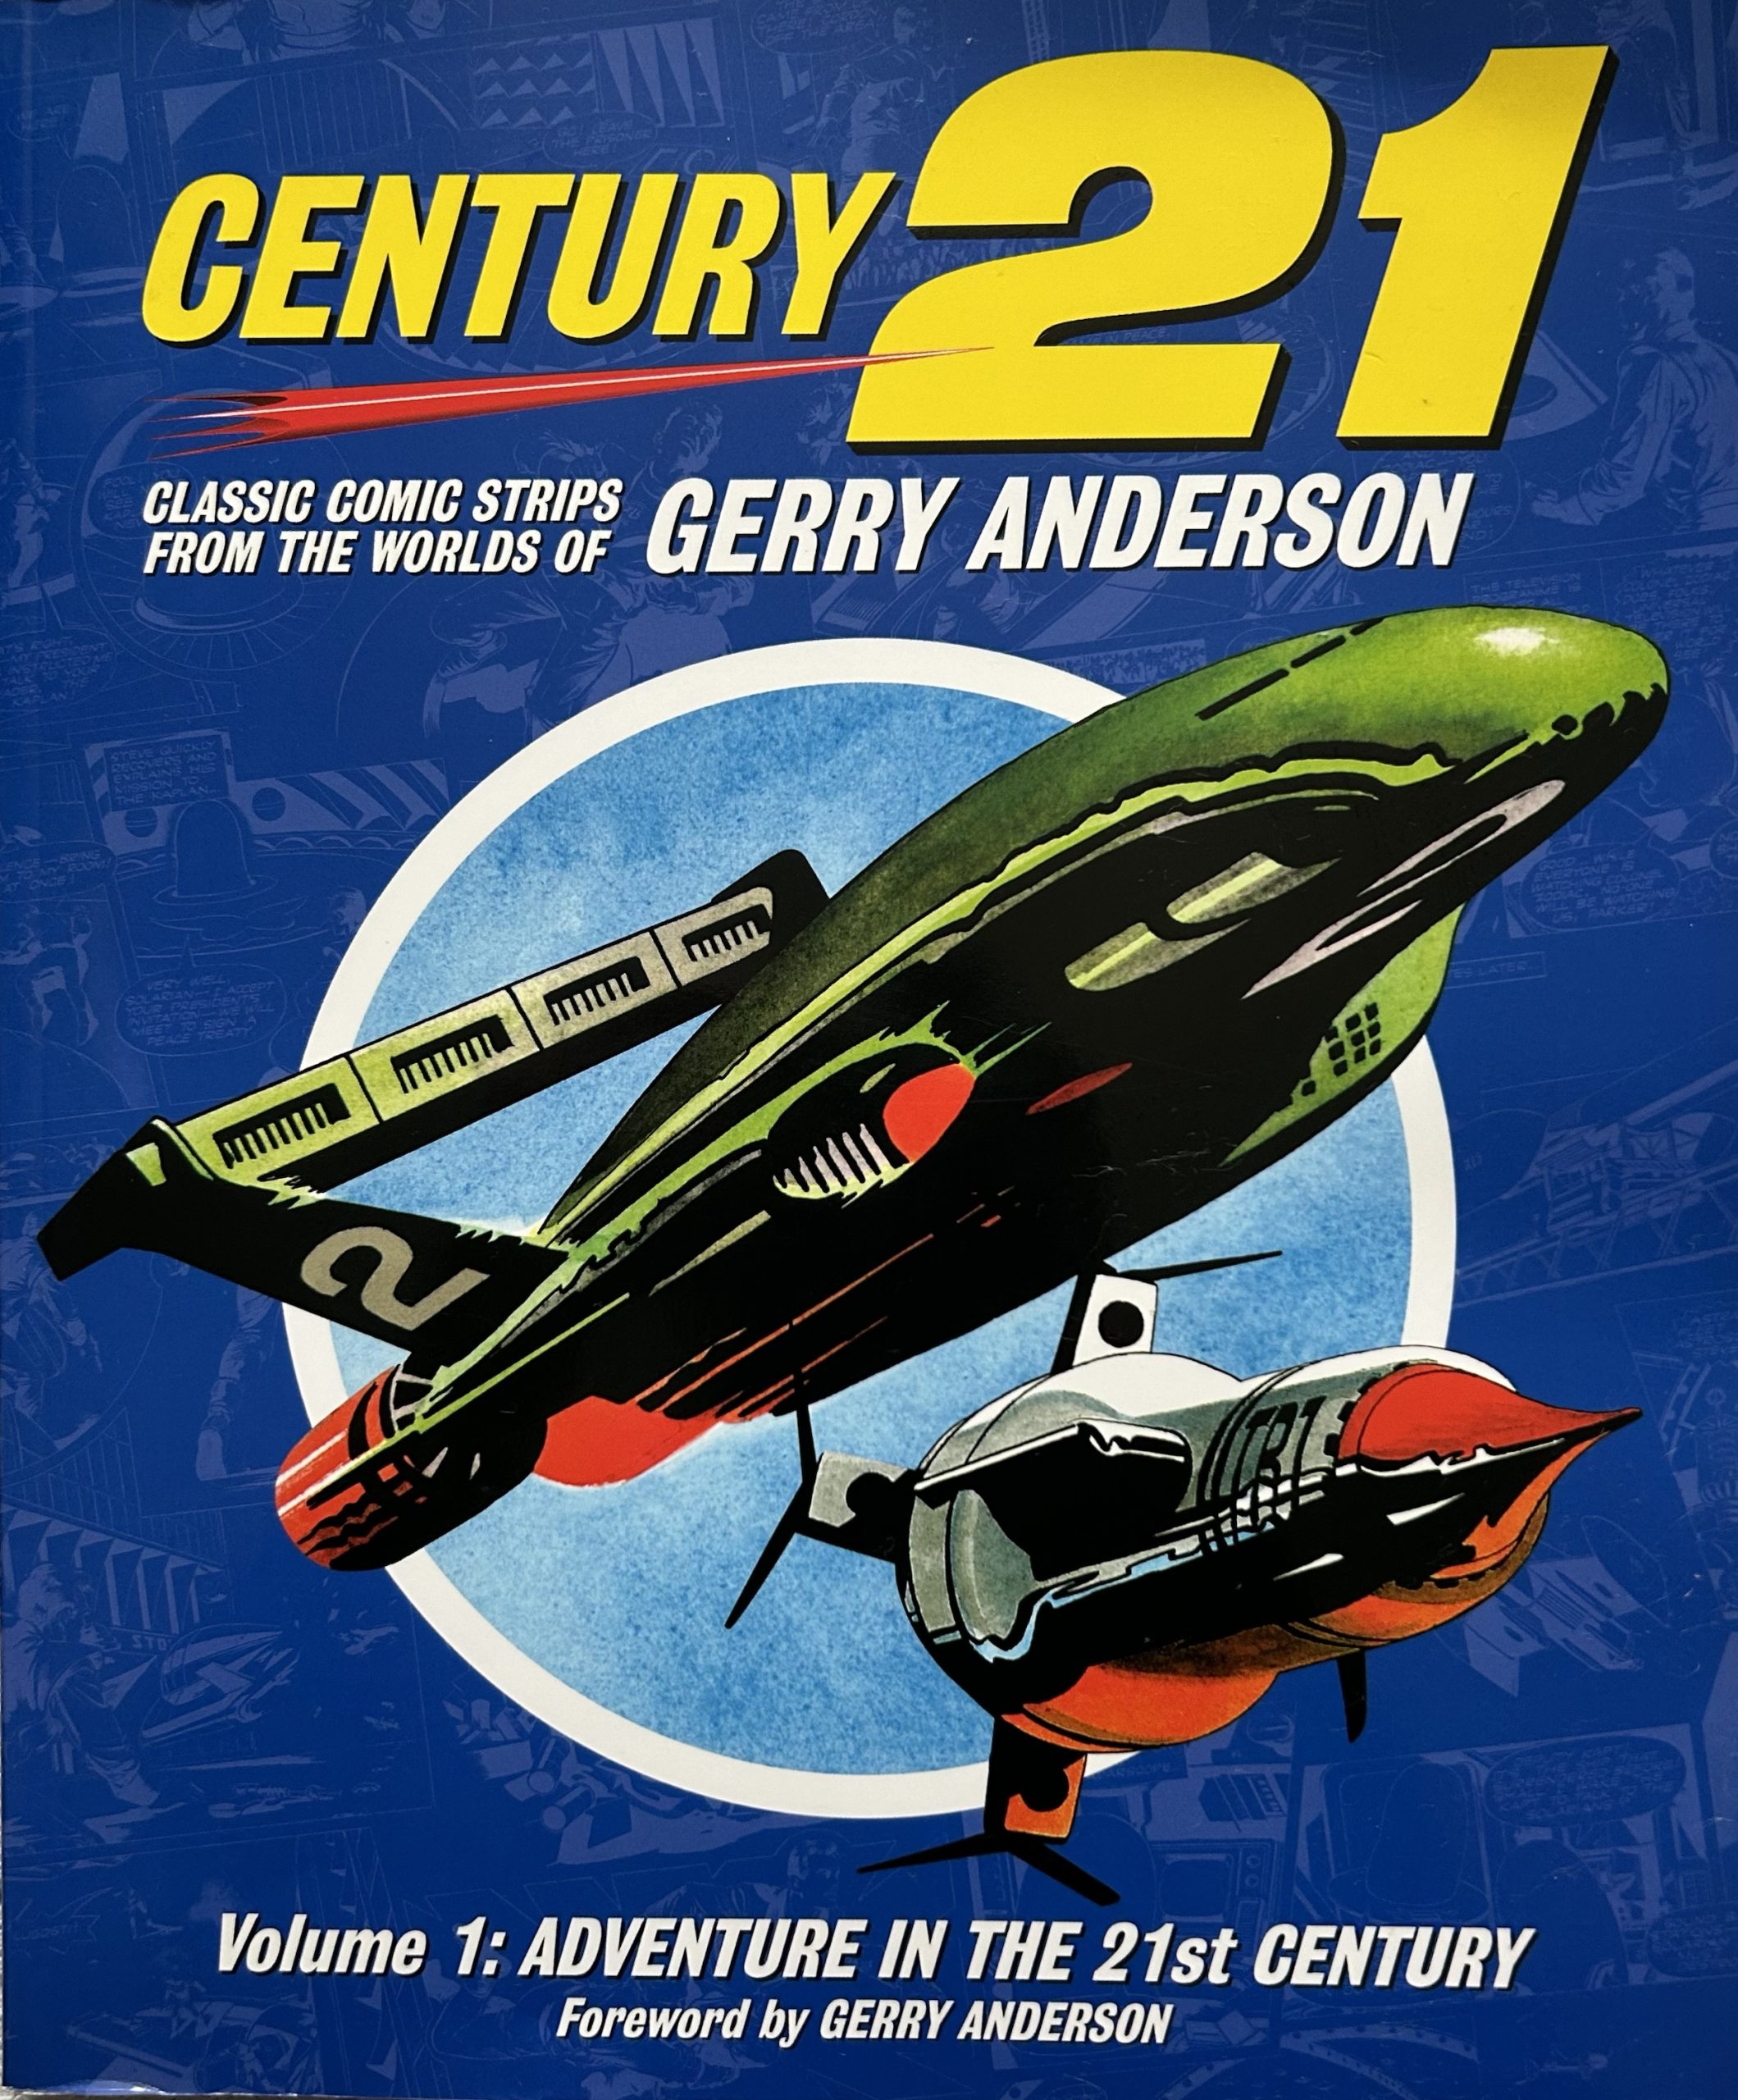 Century 21: Classic Comic Strips from the Worlds of Gerry Anderson Volume 1